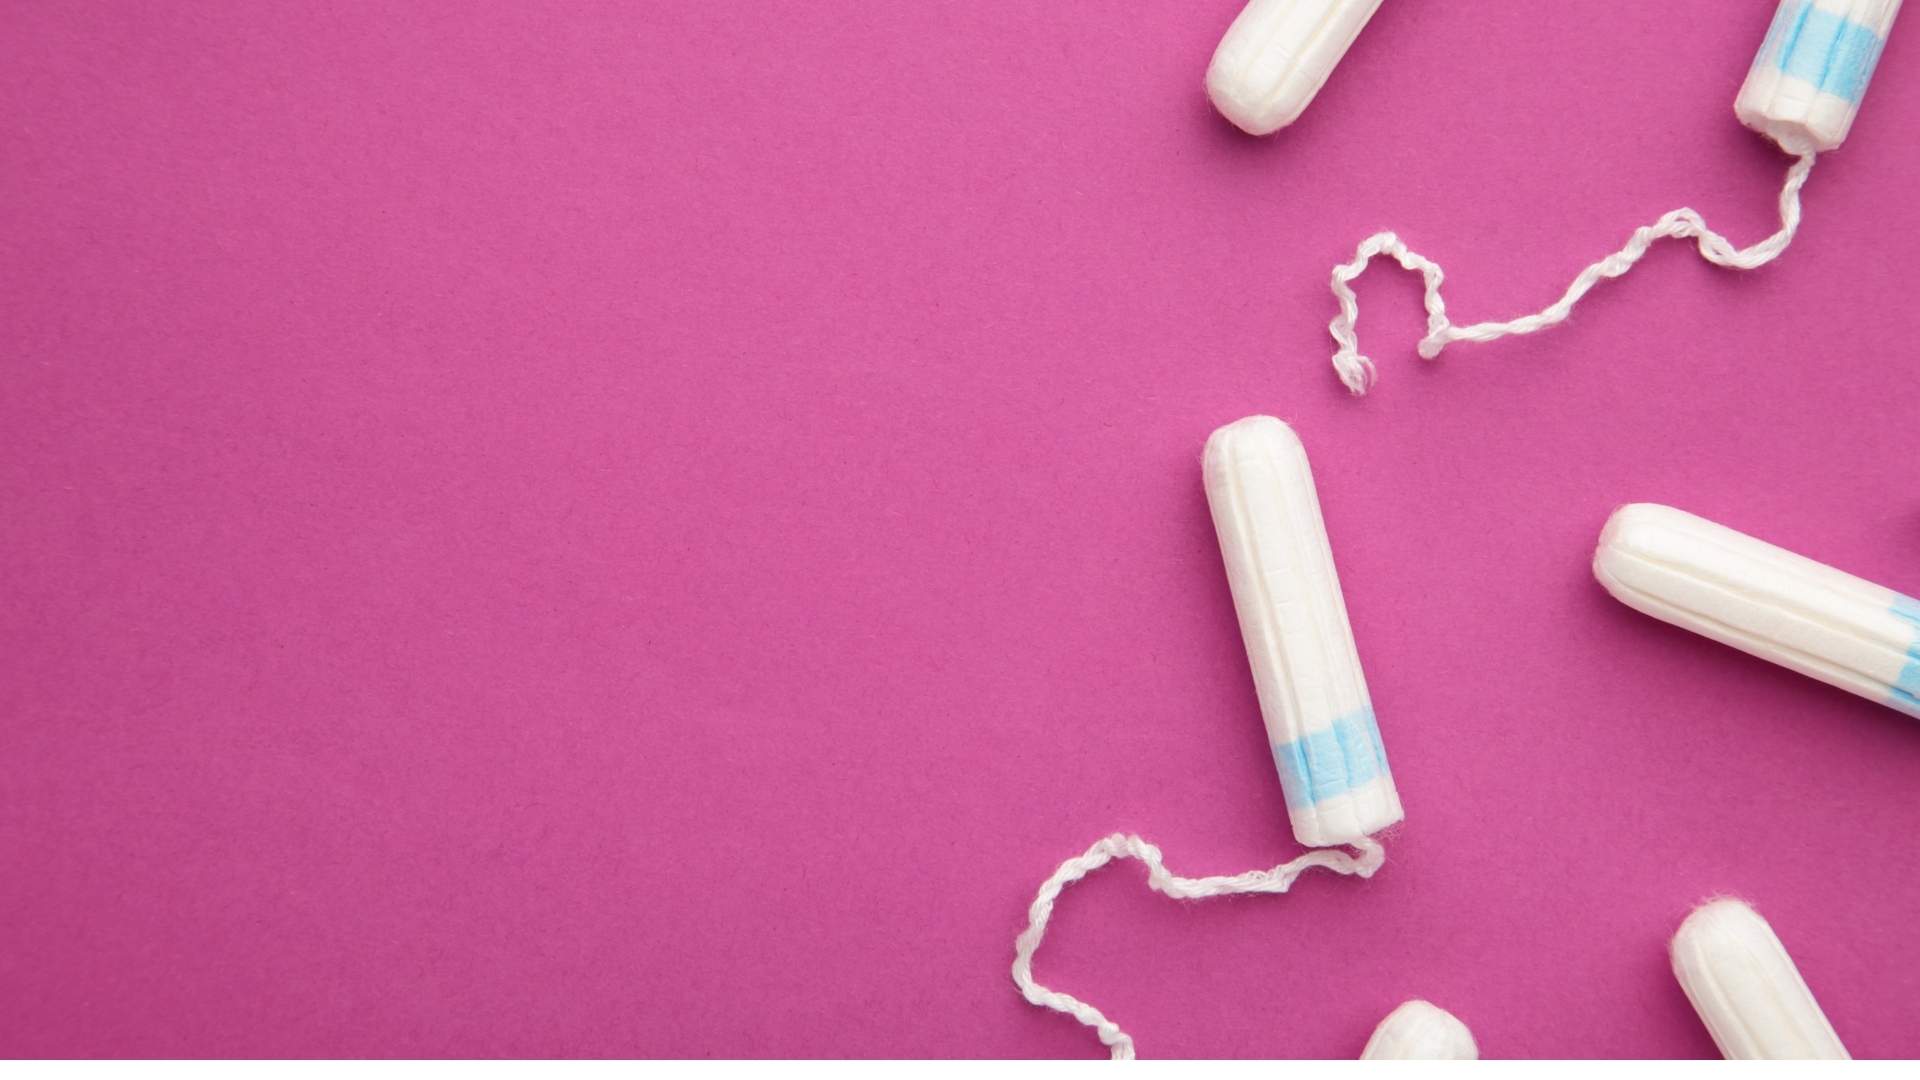 The Pros and Cons of Tampons: Advantages, Disadvantages, and How to Decide if They’re Right for You